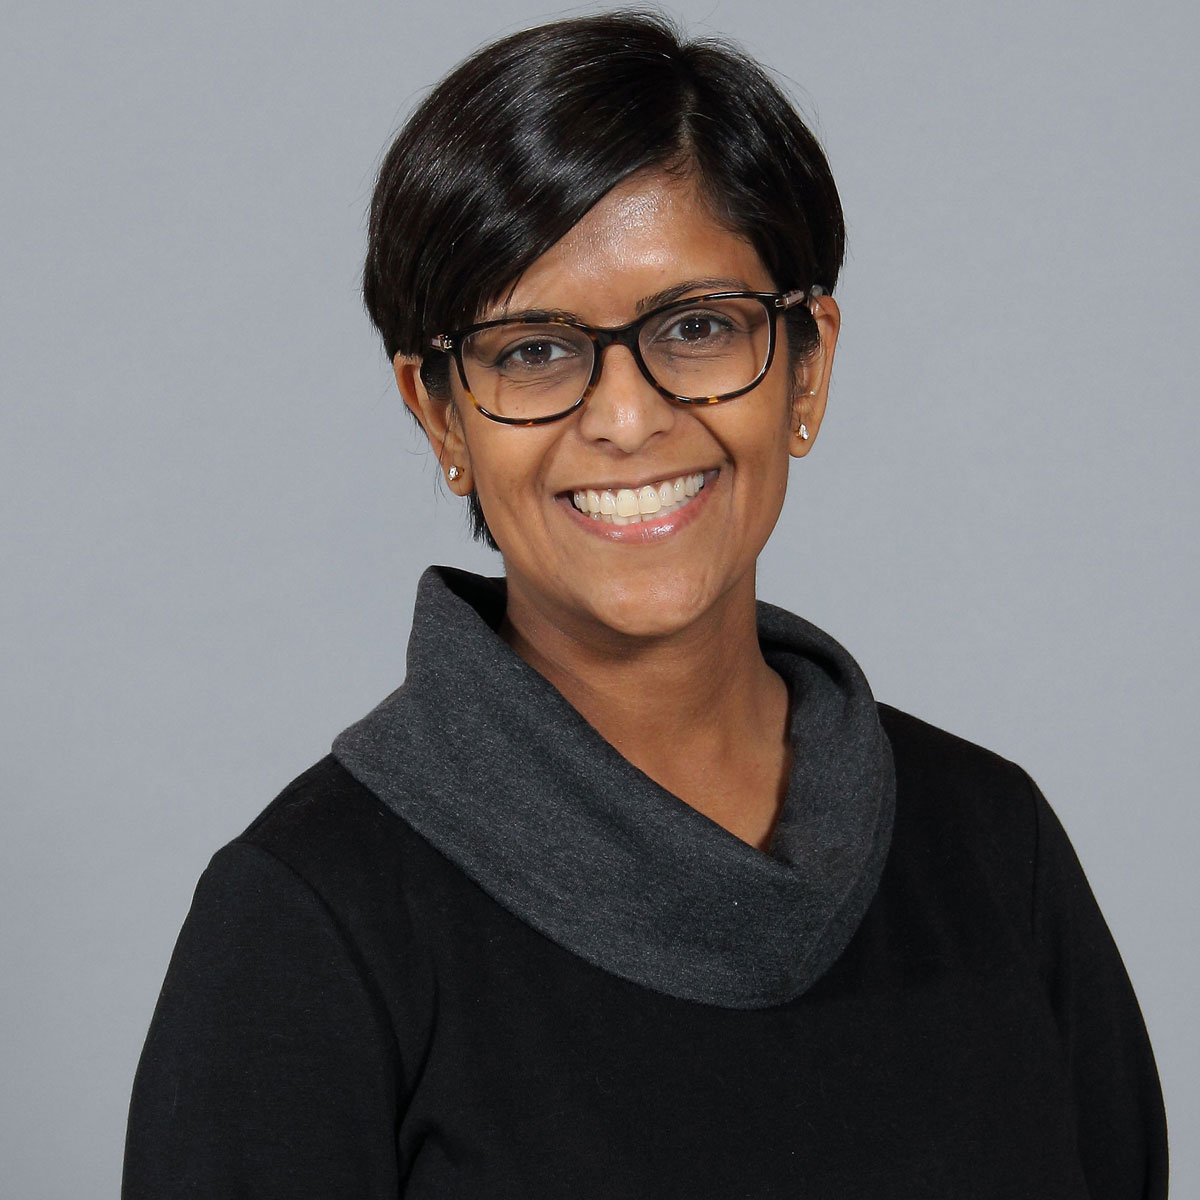 Dr. Khatri has short black hair and wears a black bloluse with a gray cowl neck and glasses.